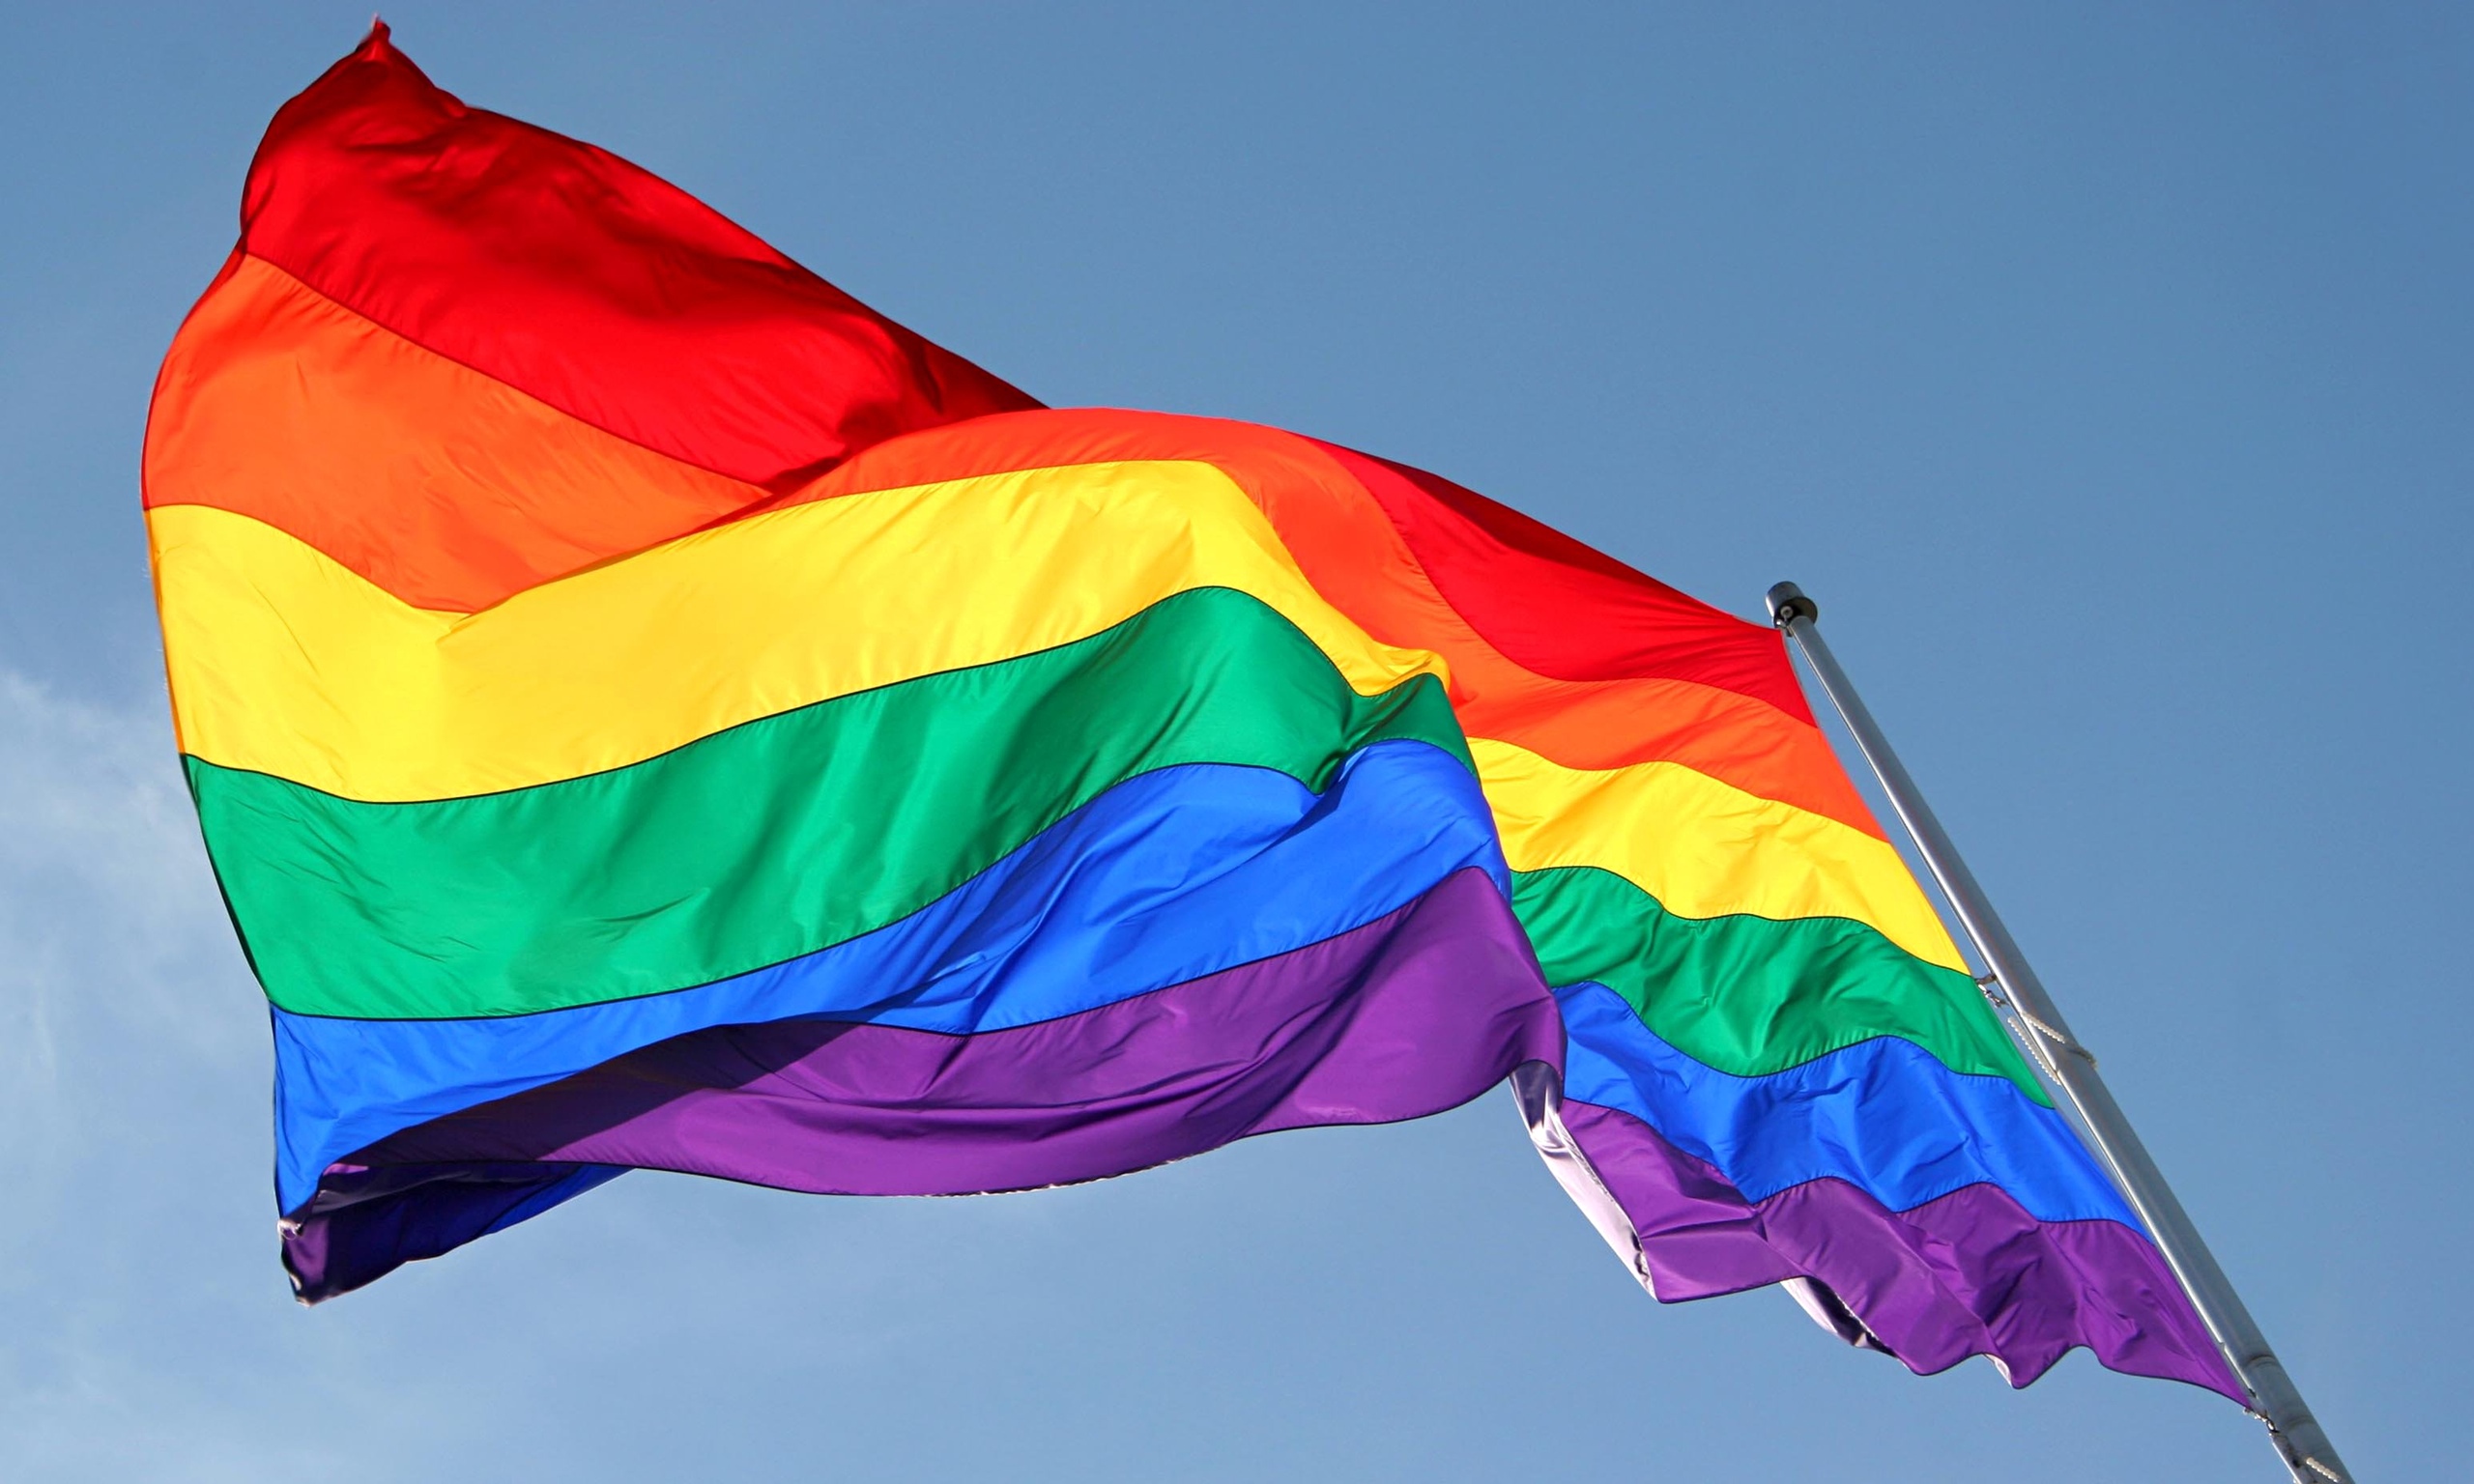 Rainbow flag will fly over Whitehall to mark first same-sex marriages